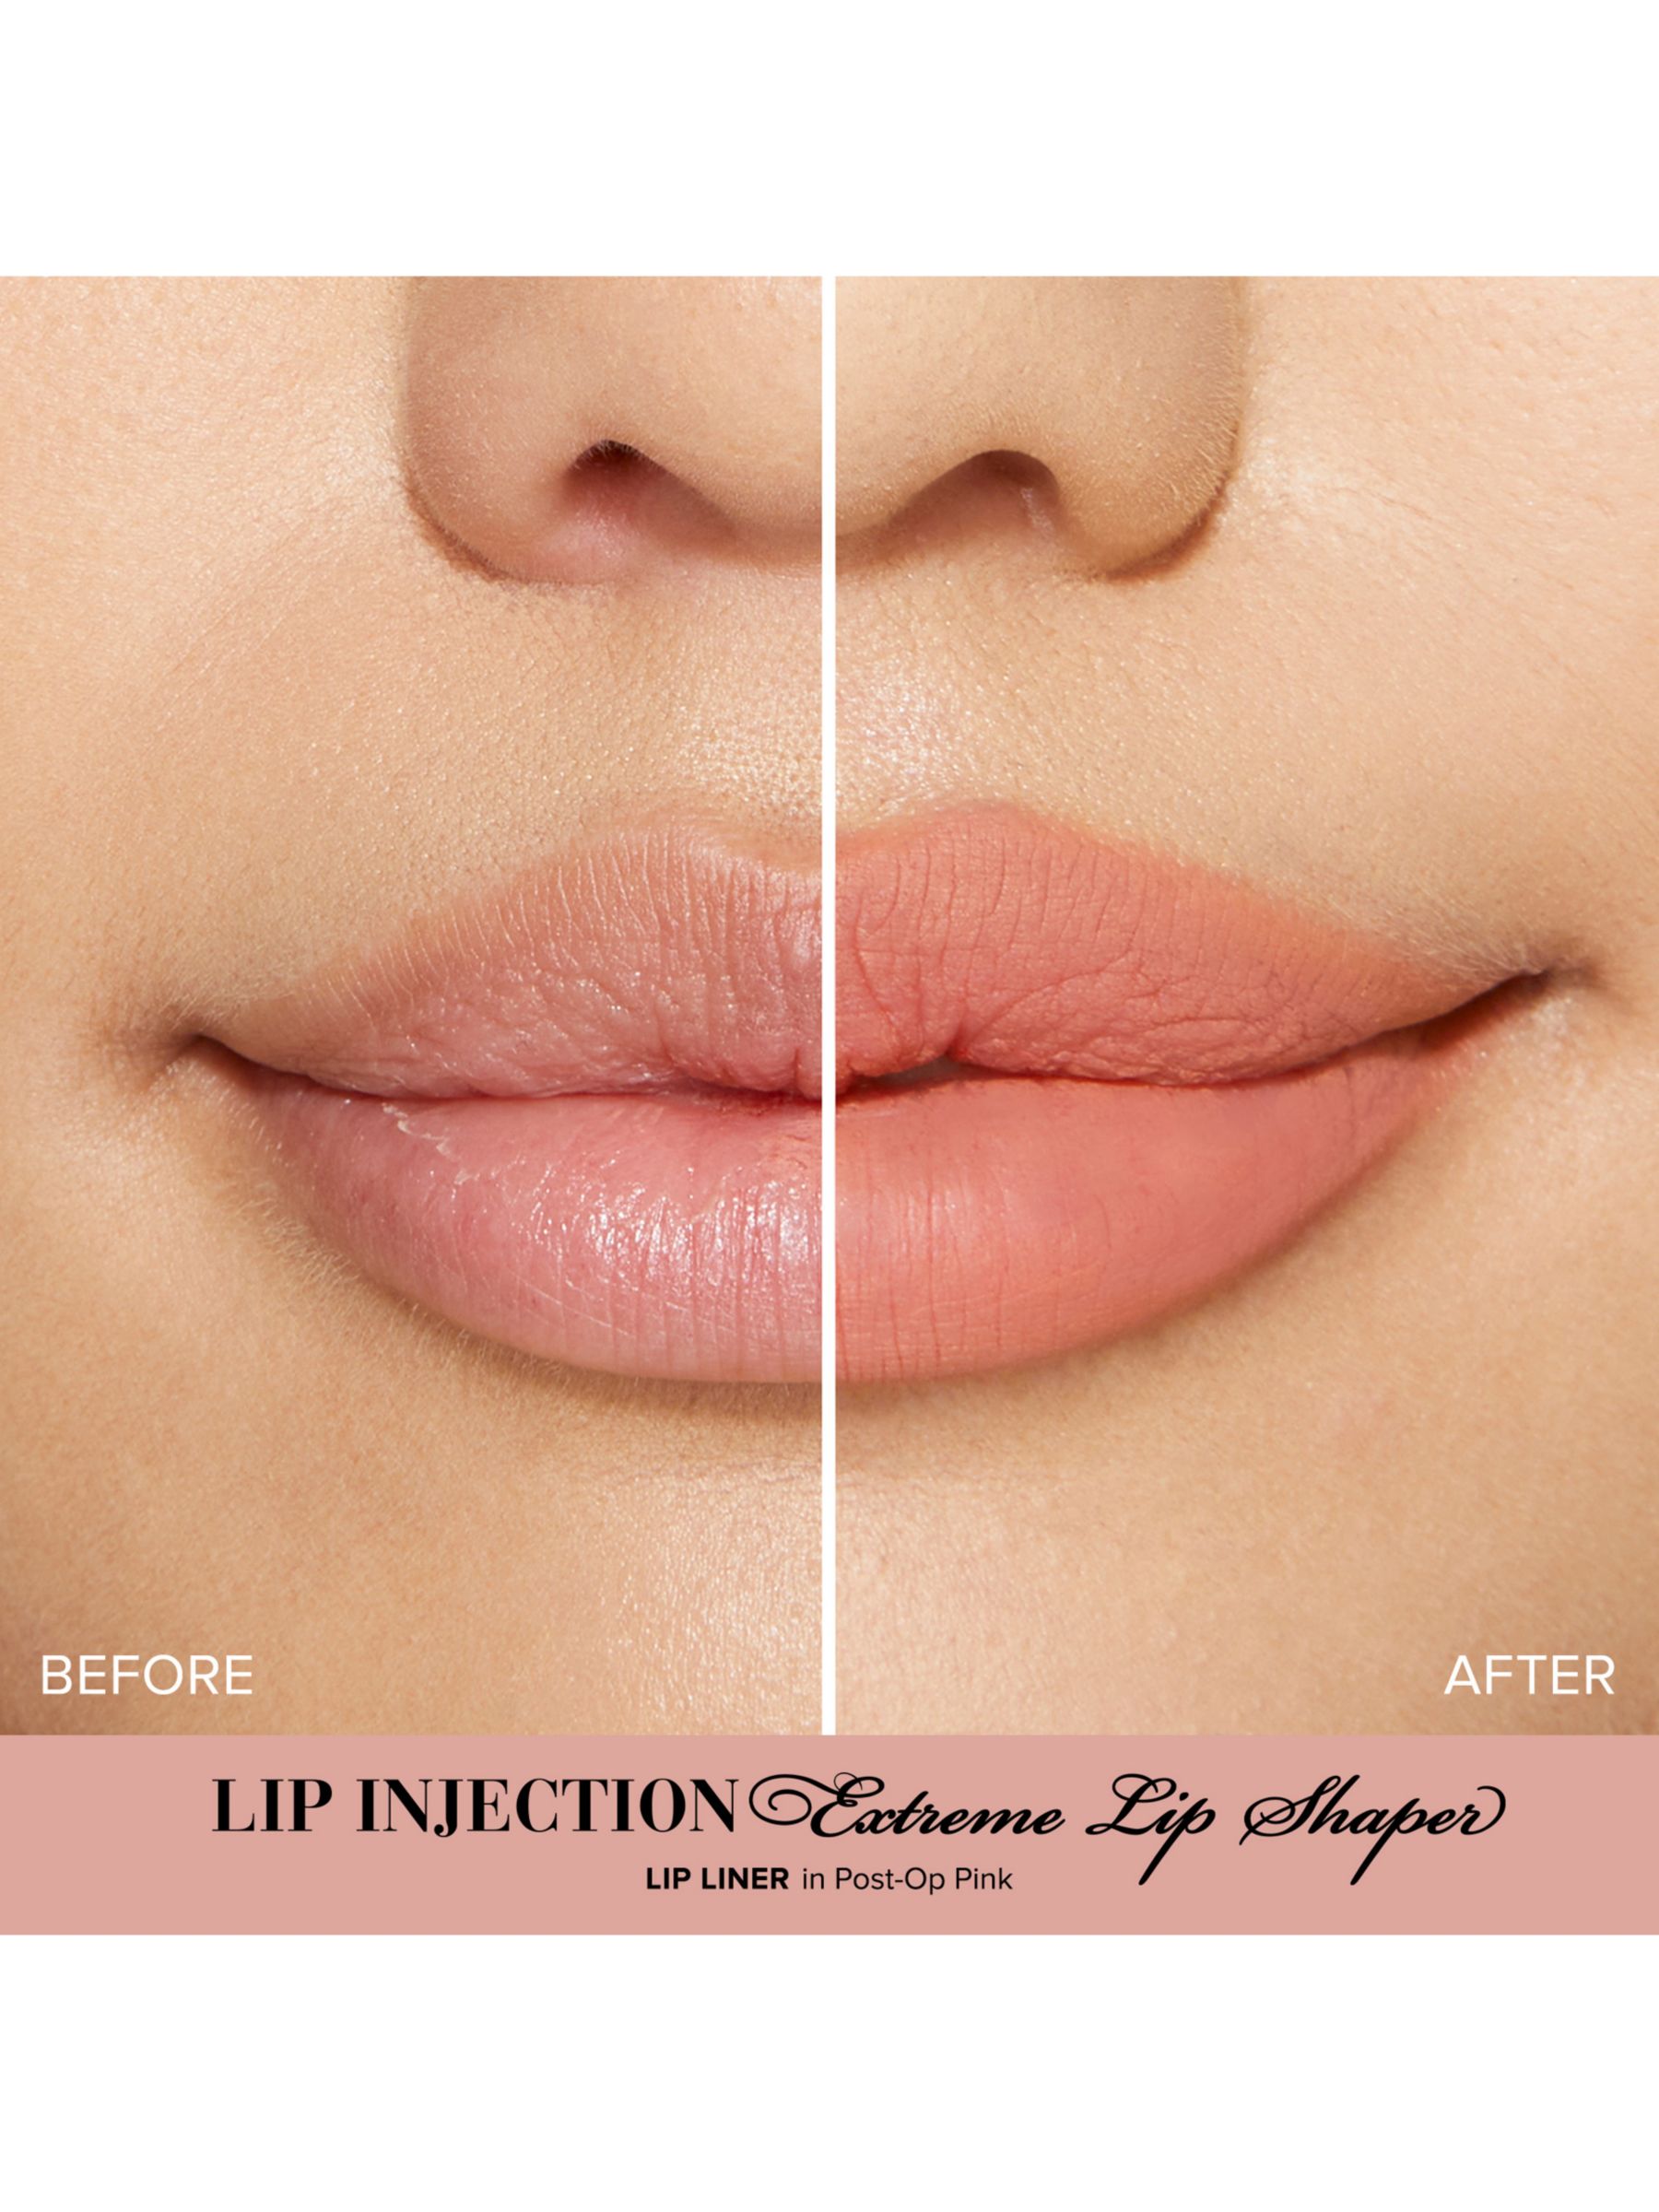 Too Faced Lip Injection Extreme Lip Shaper, Post-Op Pink 2